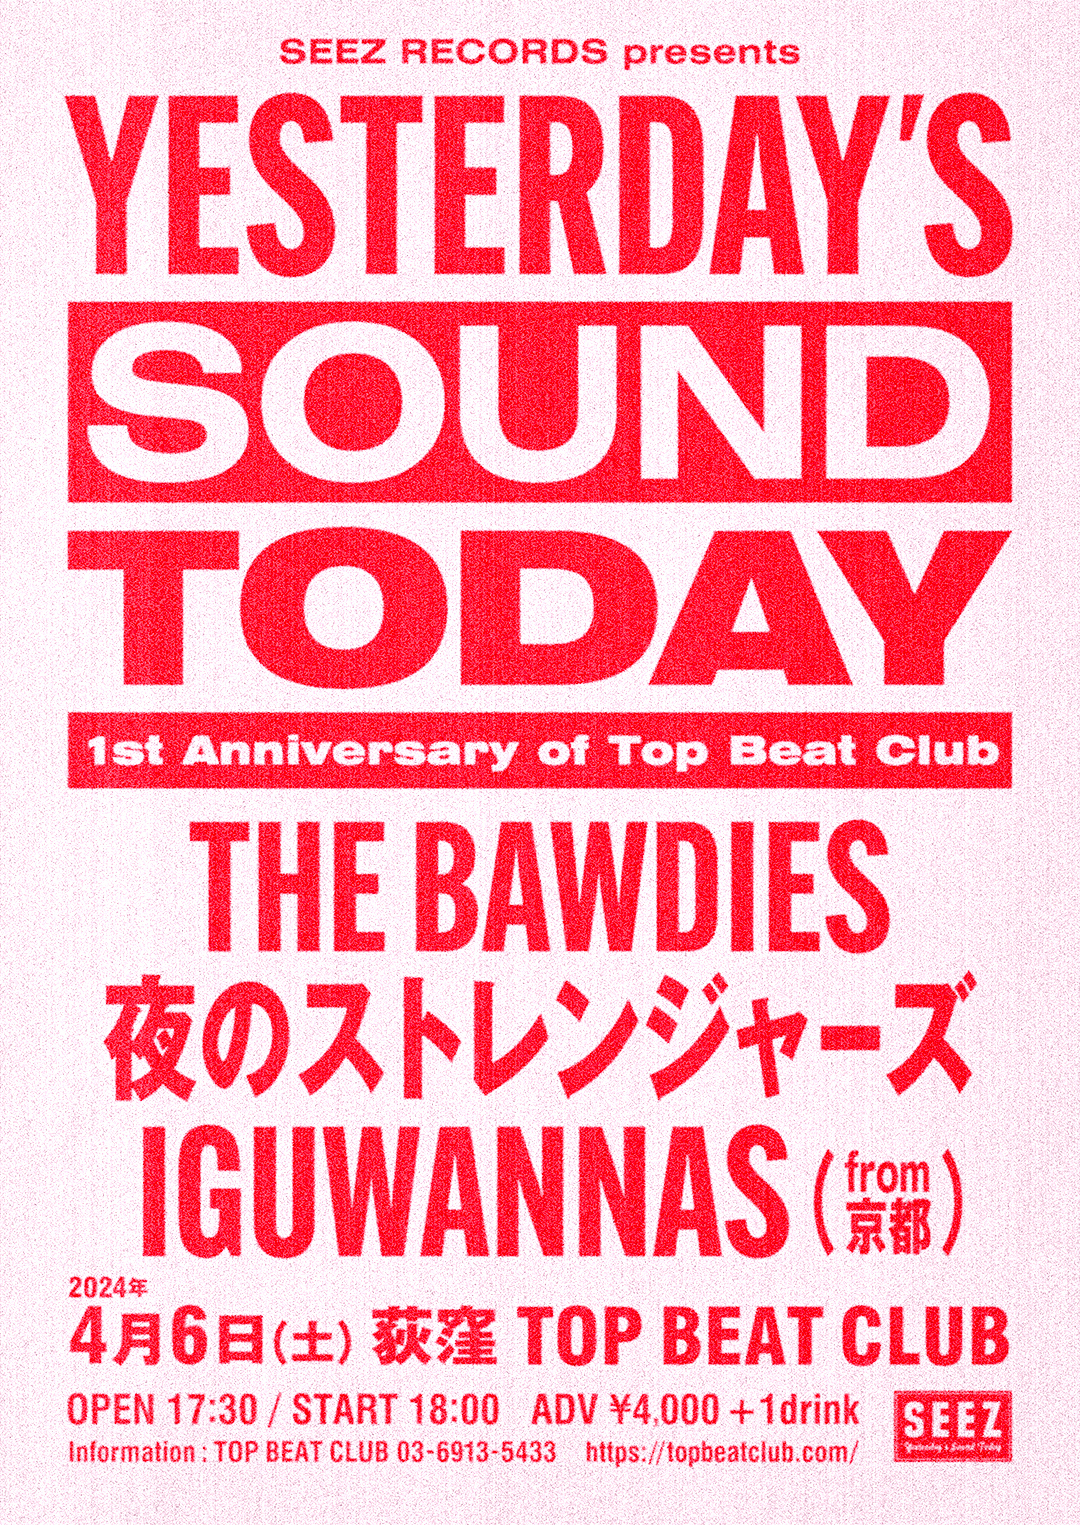 4/6「SEEZ RECORDS presents YESTERDAY’S SOUND TODAY」への出演が決定！